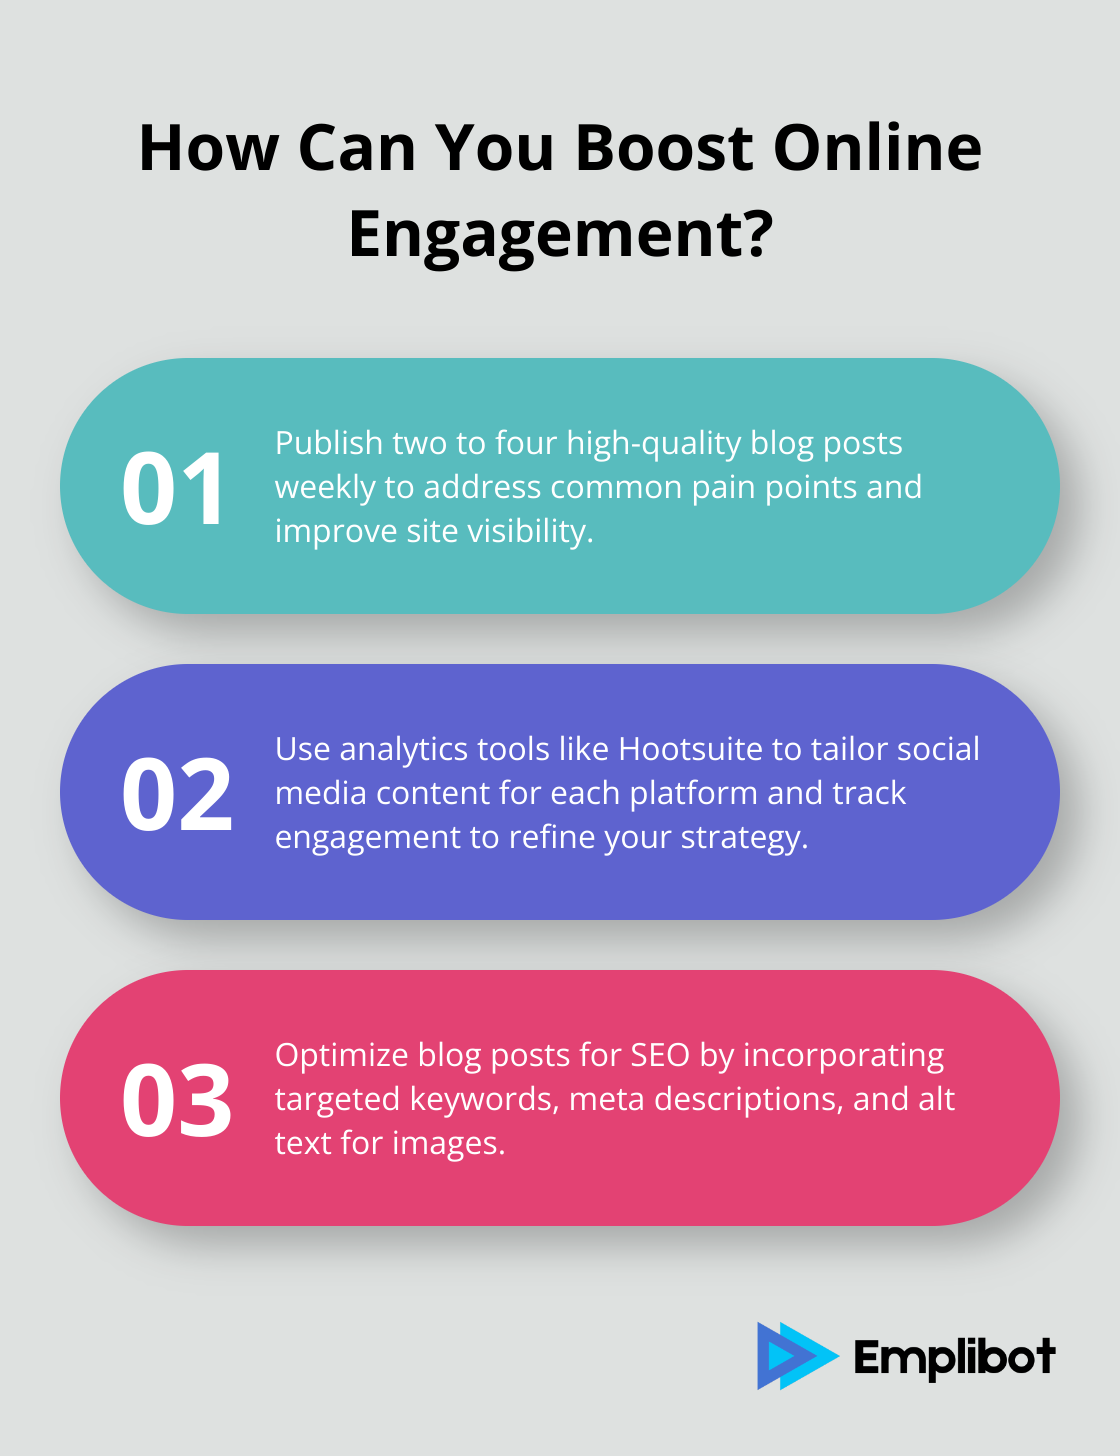 Fact - How Can You Boost Online Engagement?